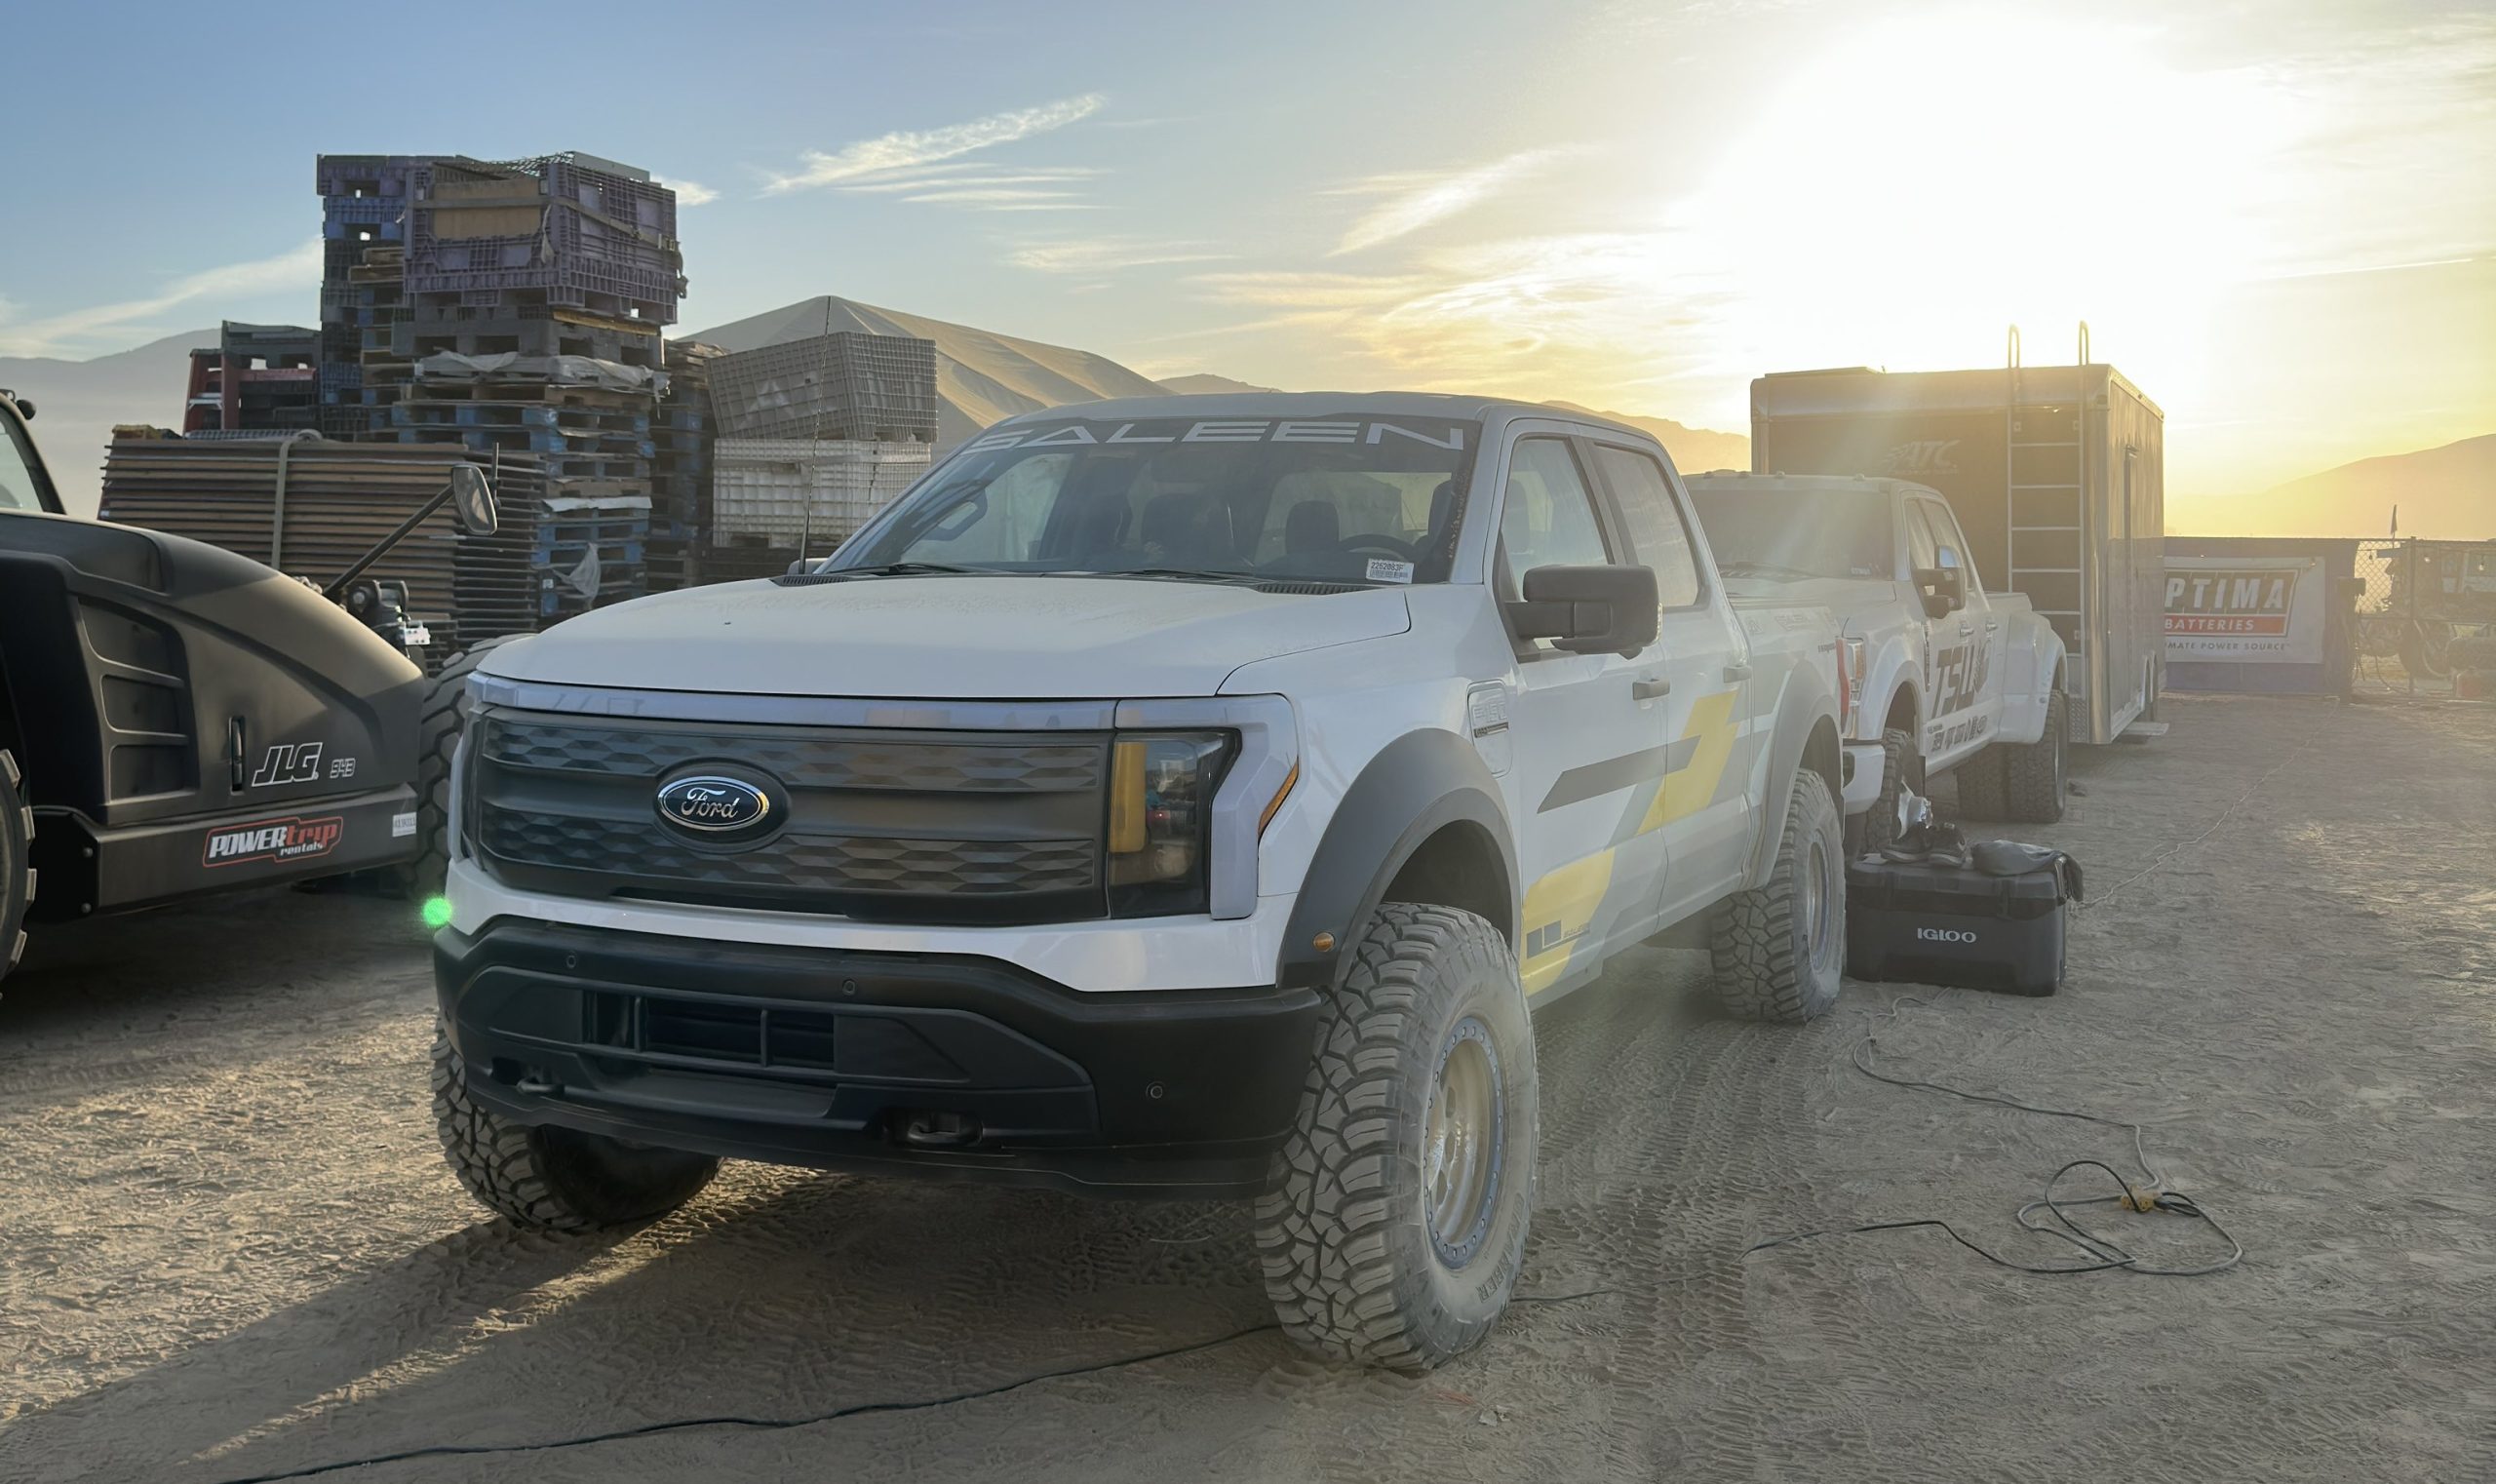 Modified Saleen Ford F-150 Lightning appears at historic off-road race